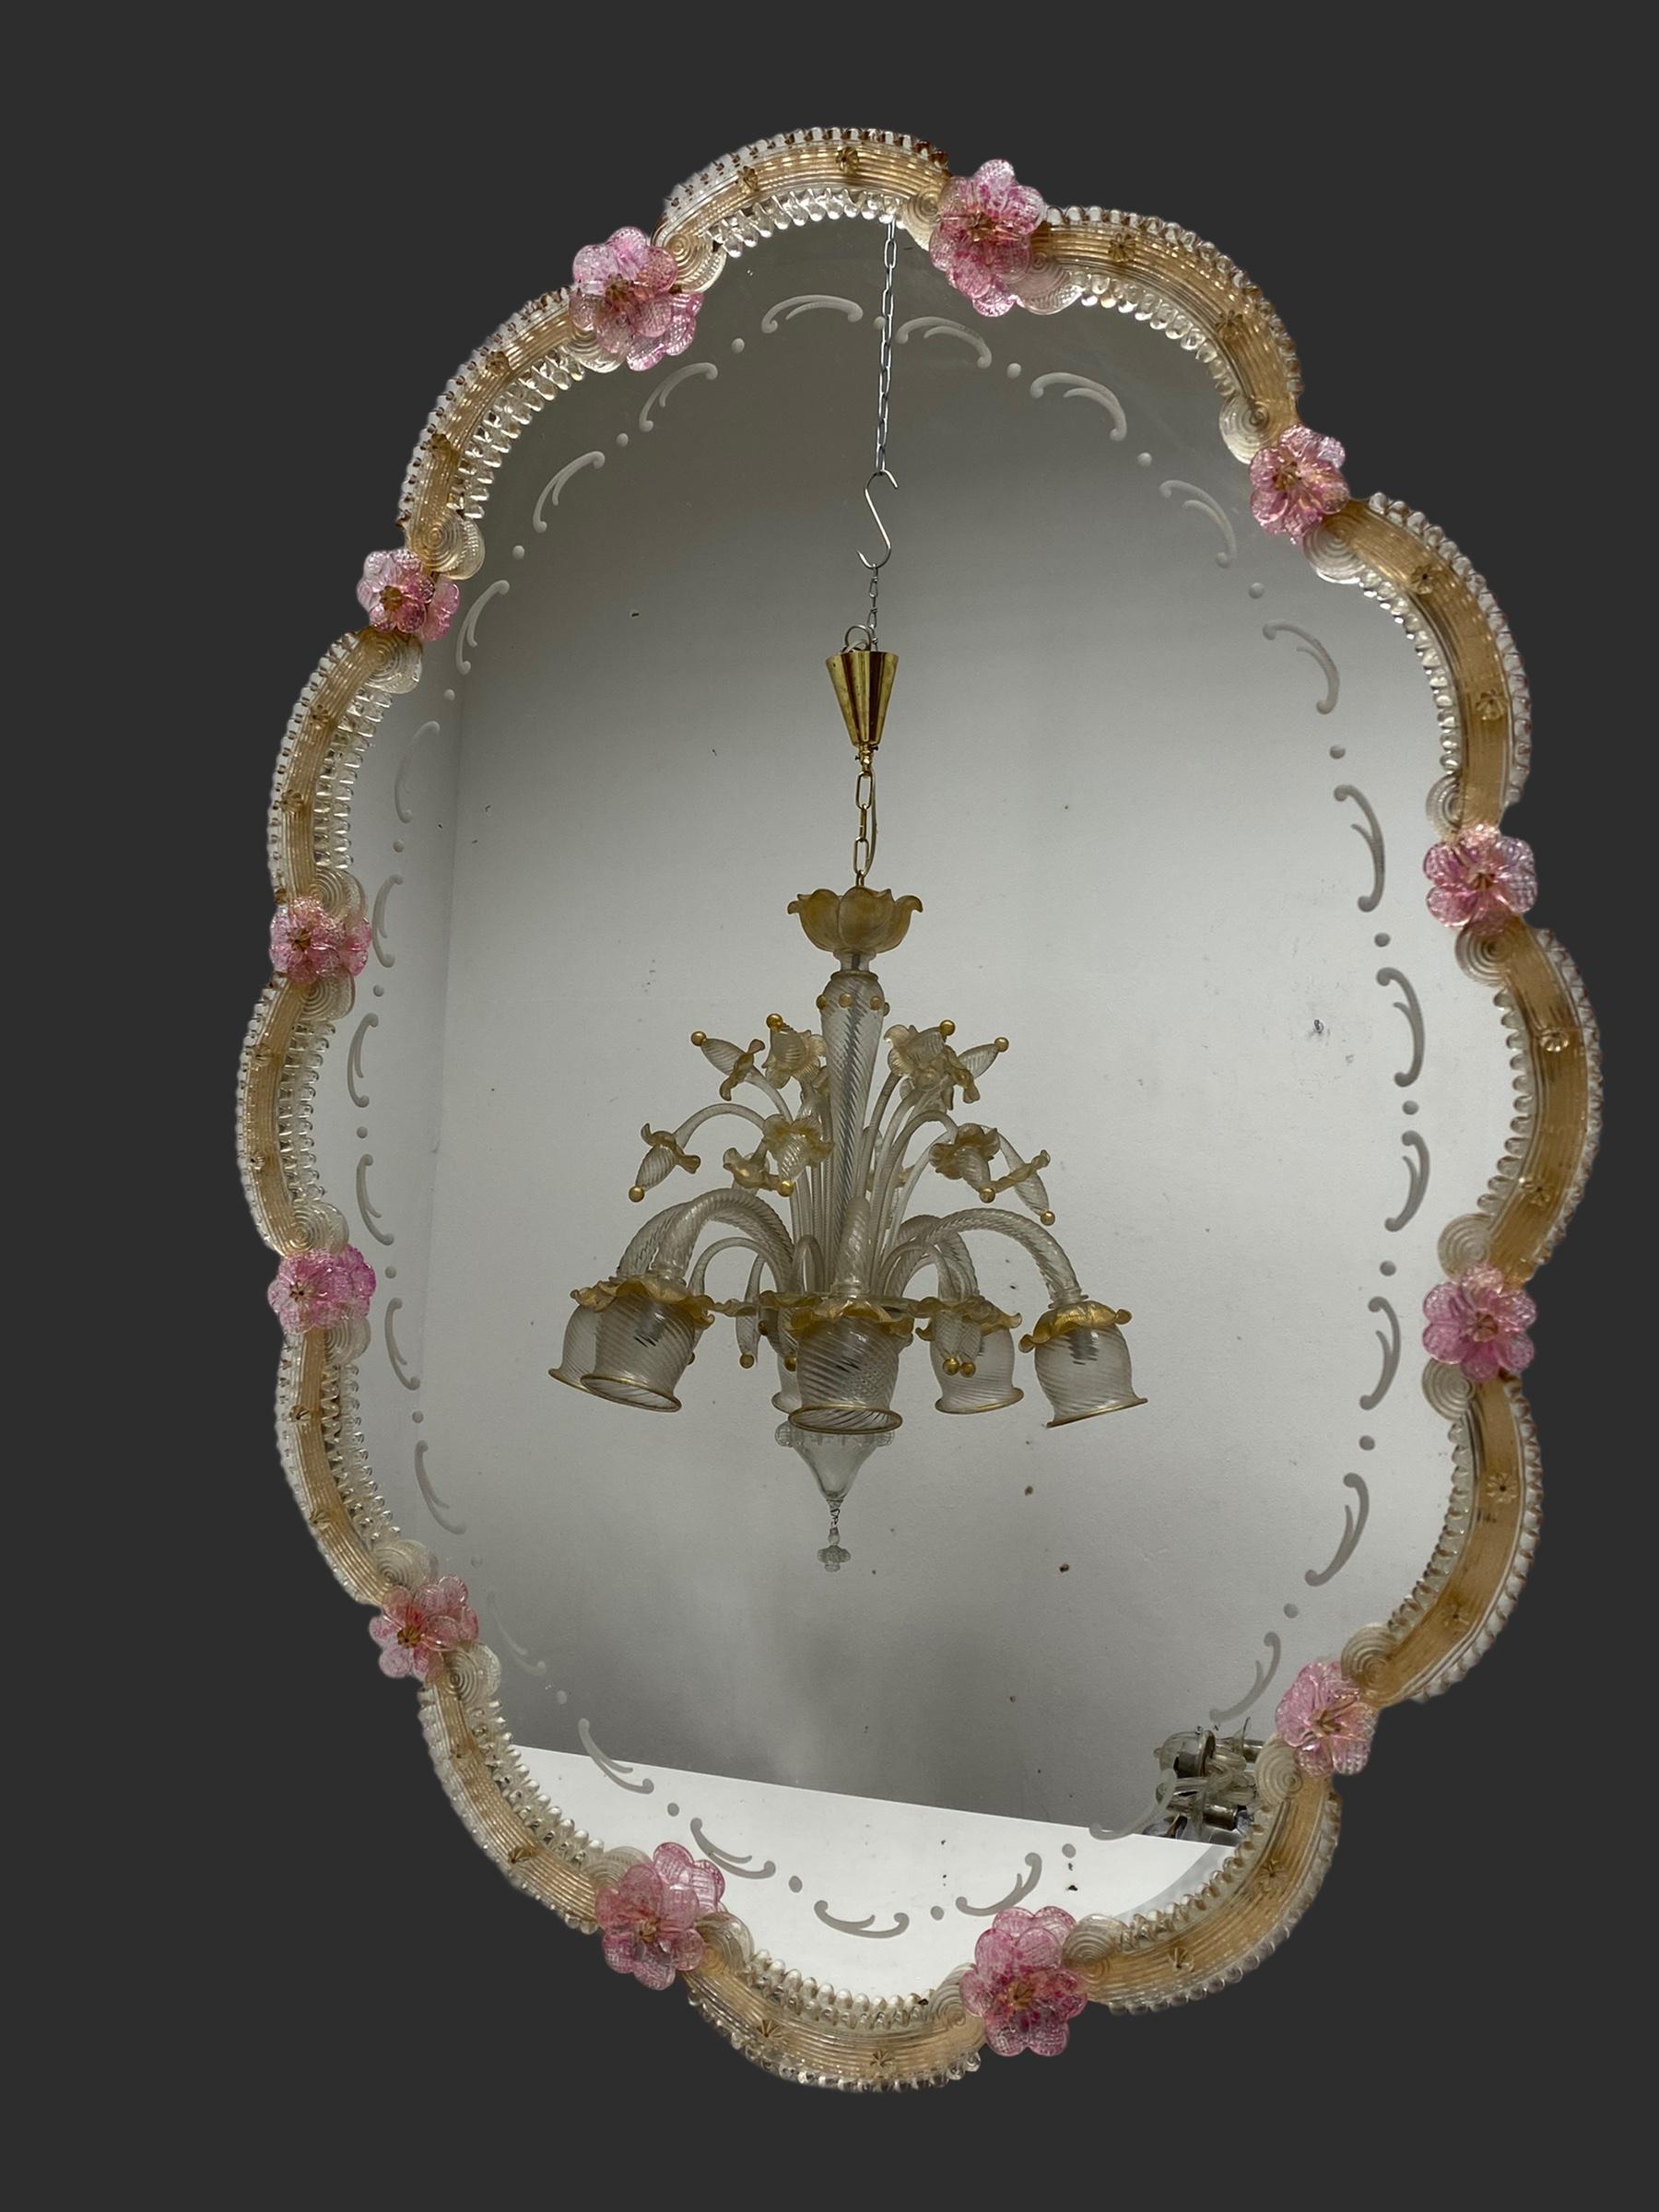 A stunning large Murano glass mirror surrounded with handmade pink glass flowers. It is approx. from the 1960s or older. A view distressed or blind spots in the mirror but this is old-age. With signs of wear as expected with age and use. Obviously